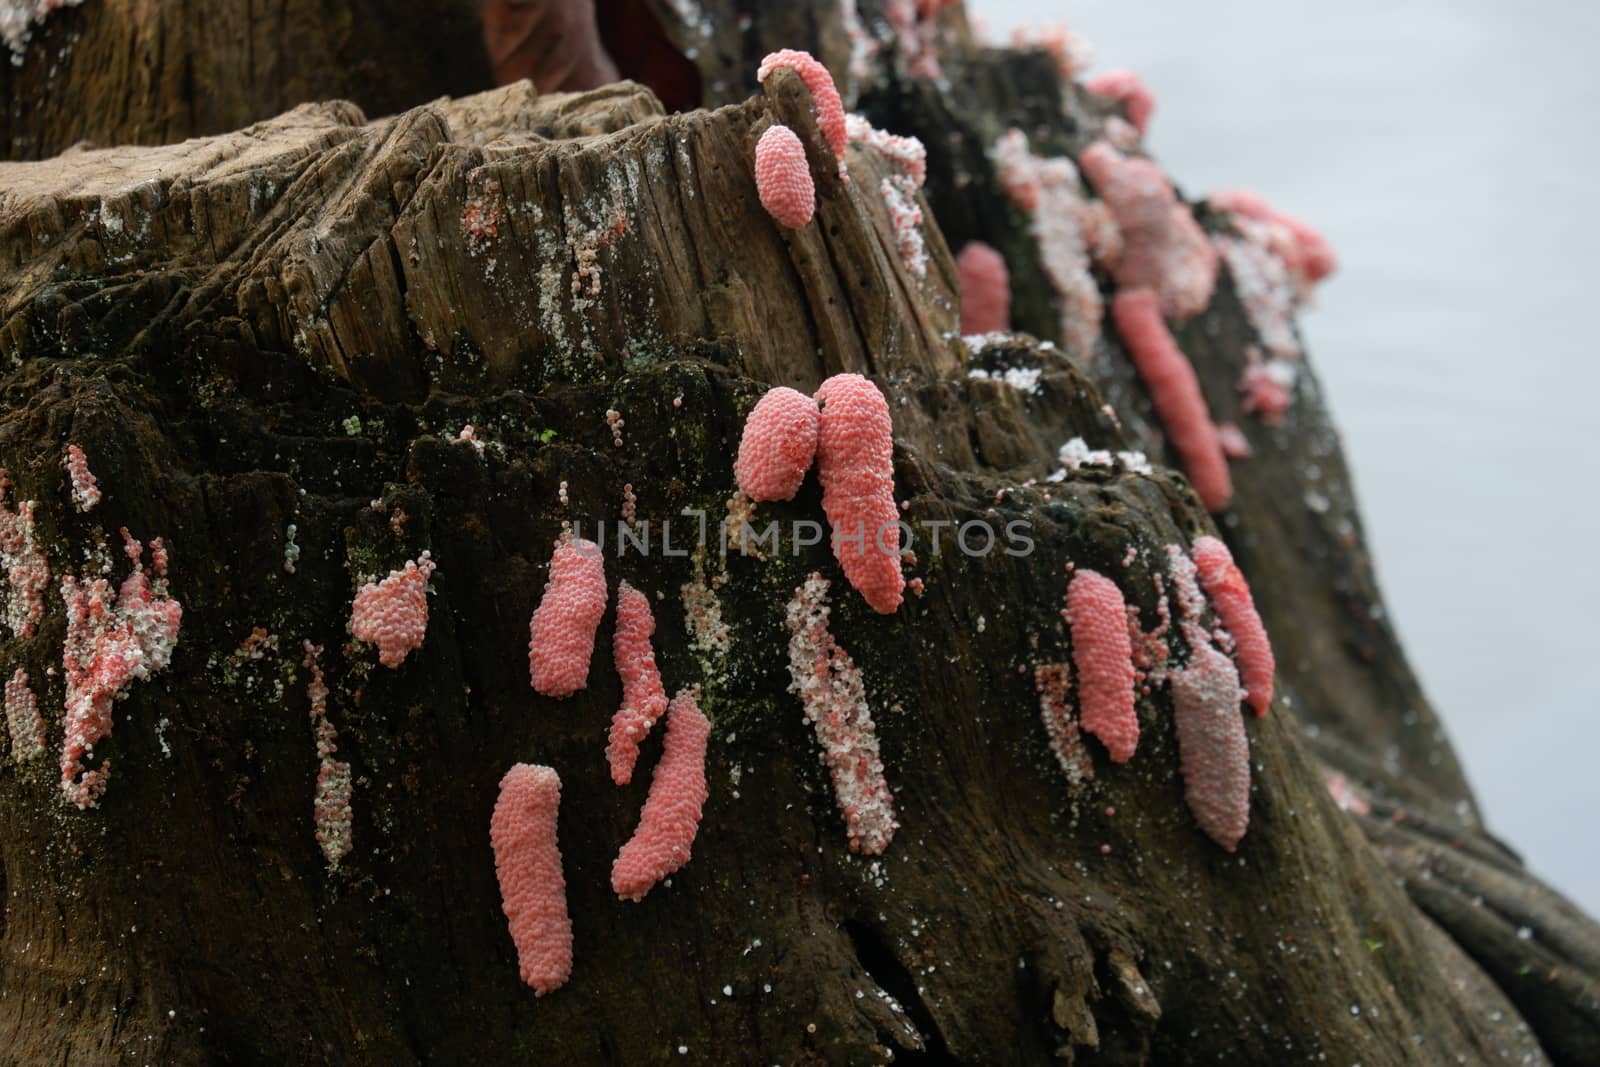 focus image of pink snail / conch eggs attached to the surface of the pool wall